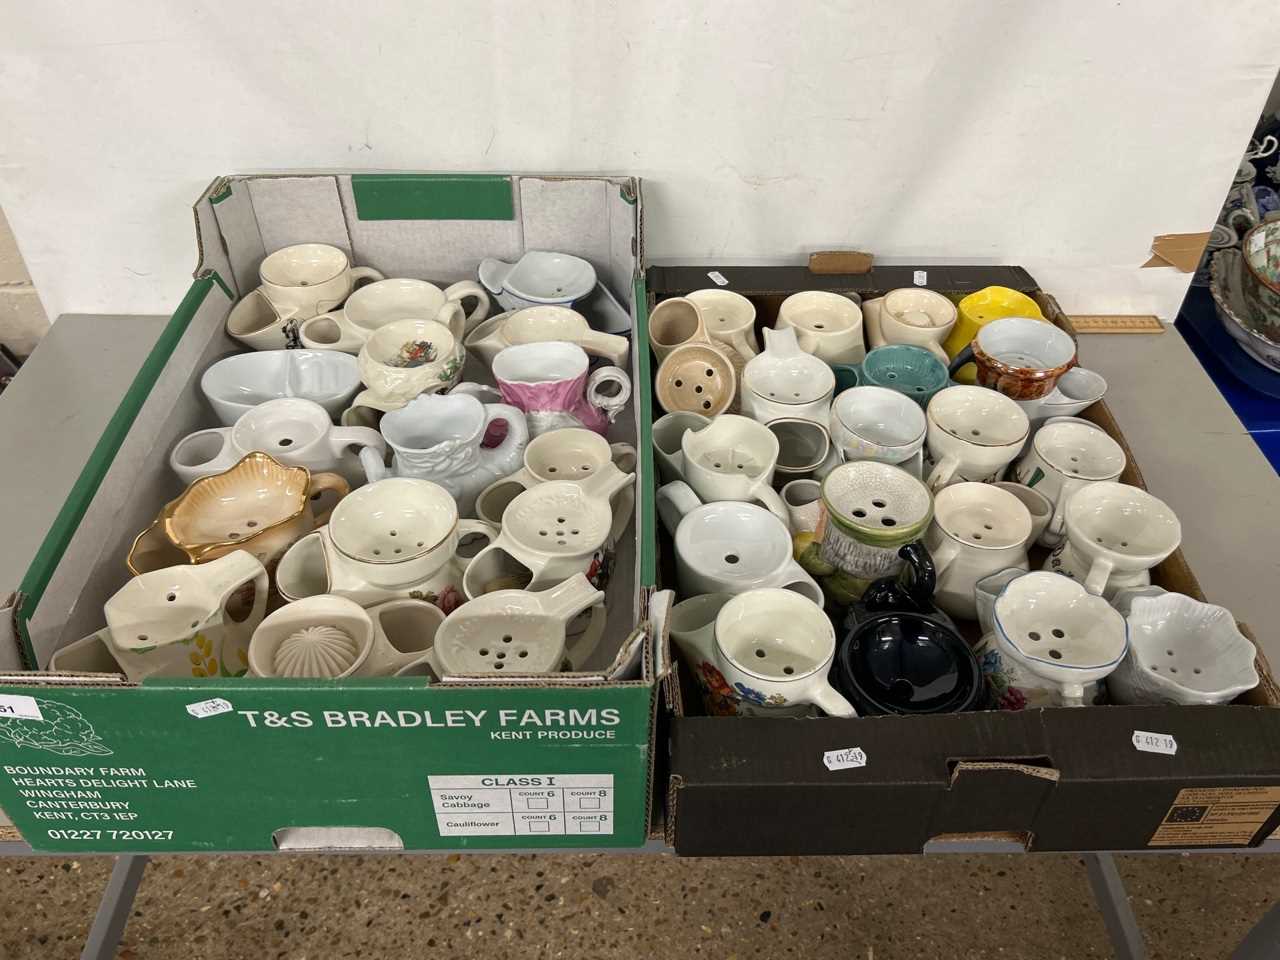 Two boxes containing a large collection of pottery shaving mugs